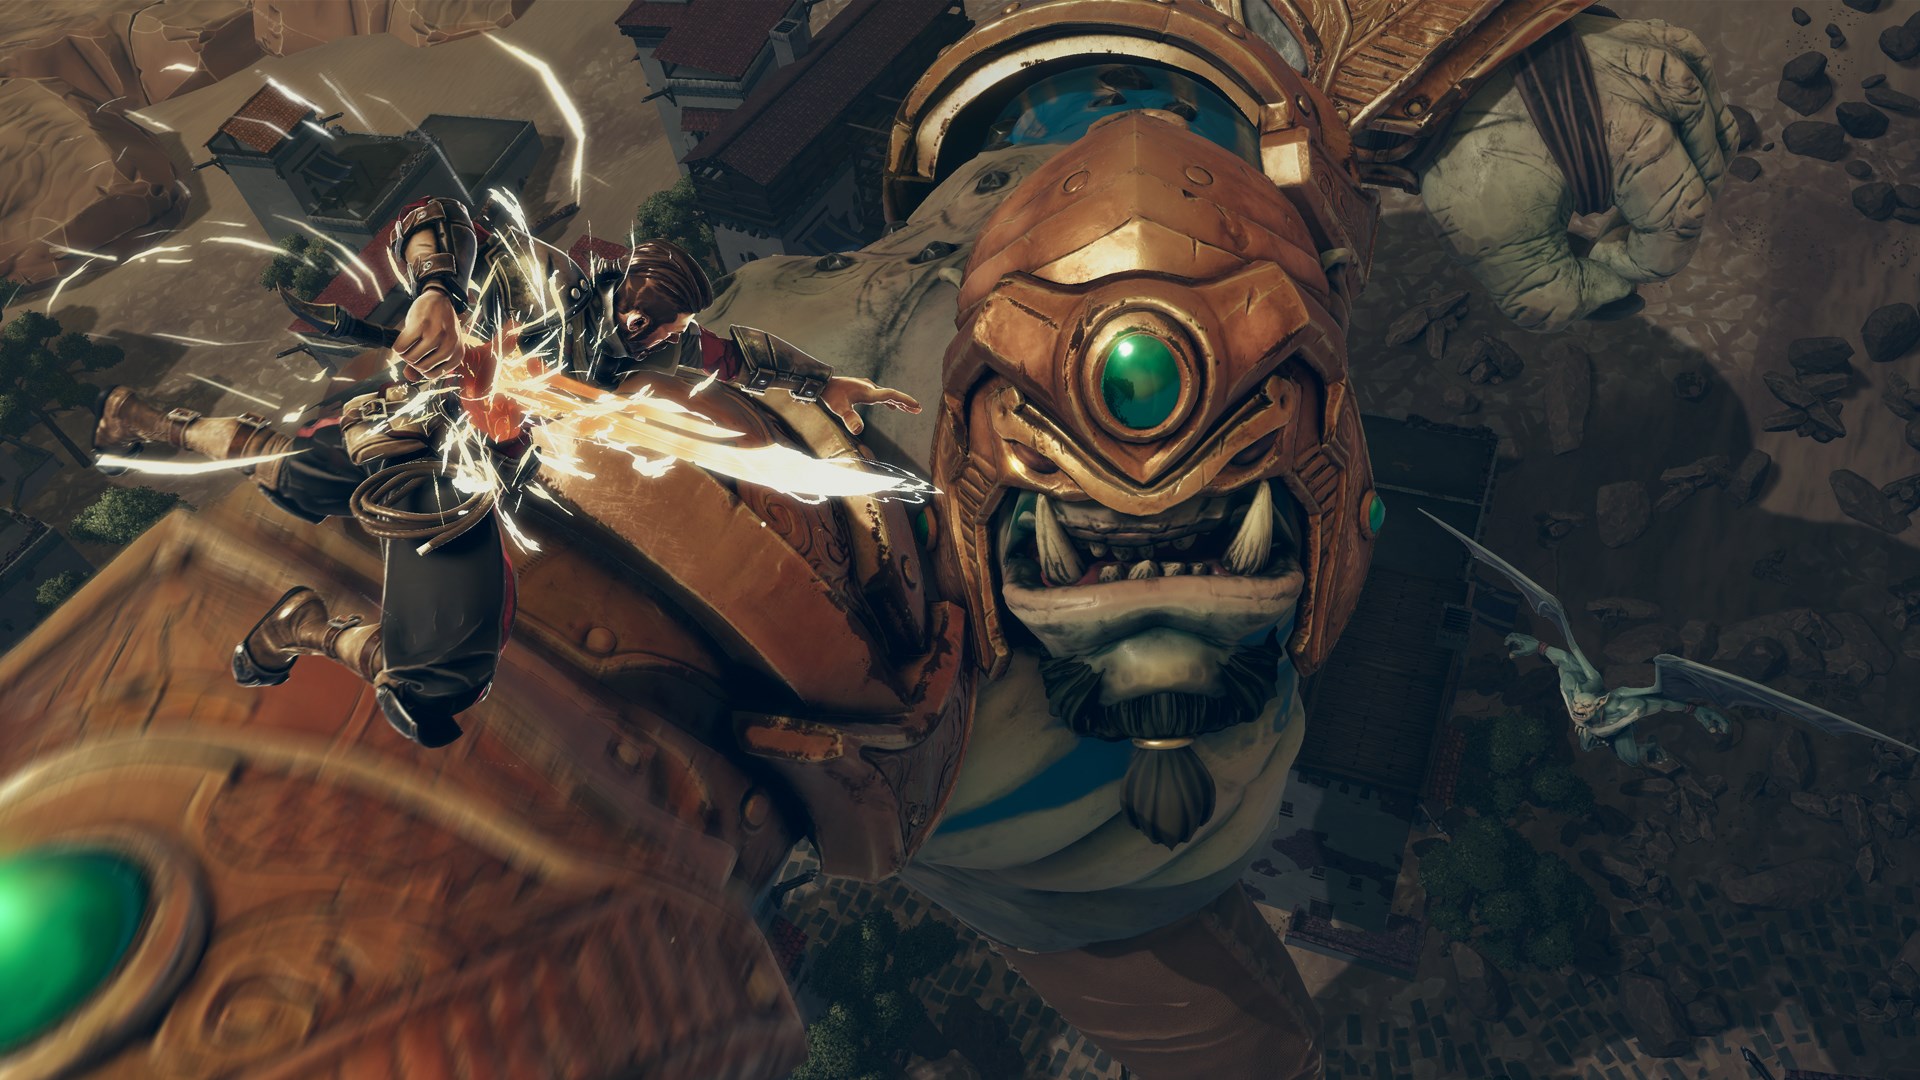 New Extinction gameplay trailer details the types of ogres you’ll cut down to size